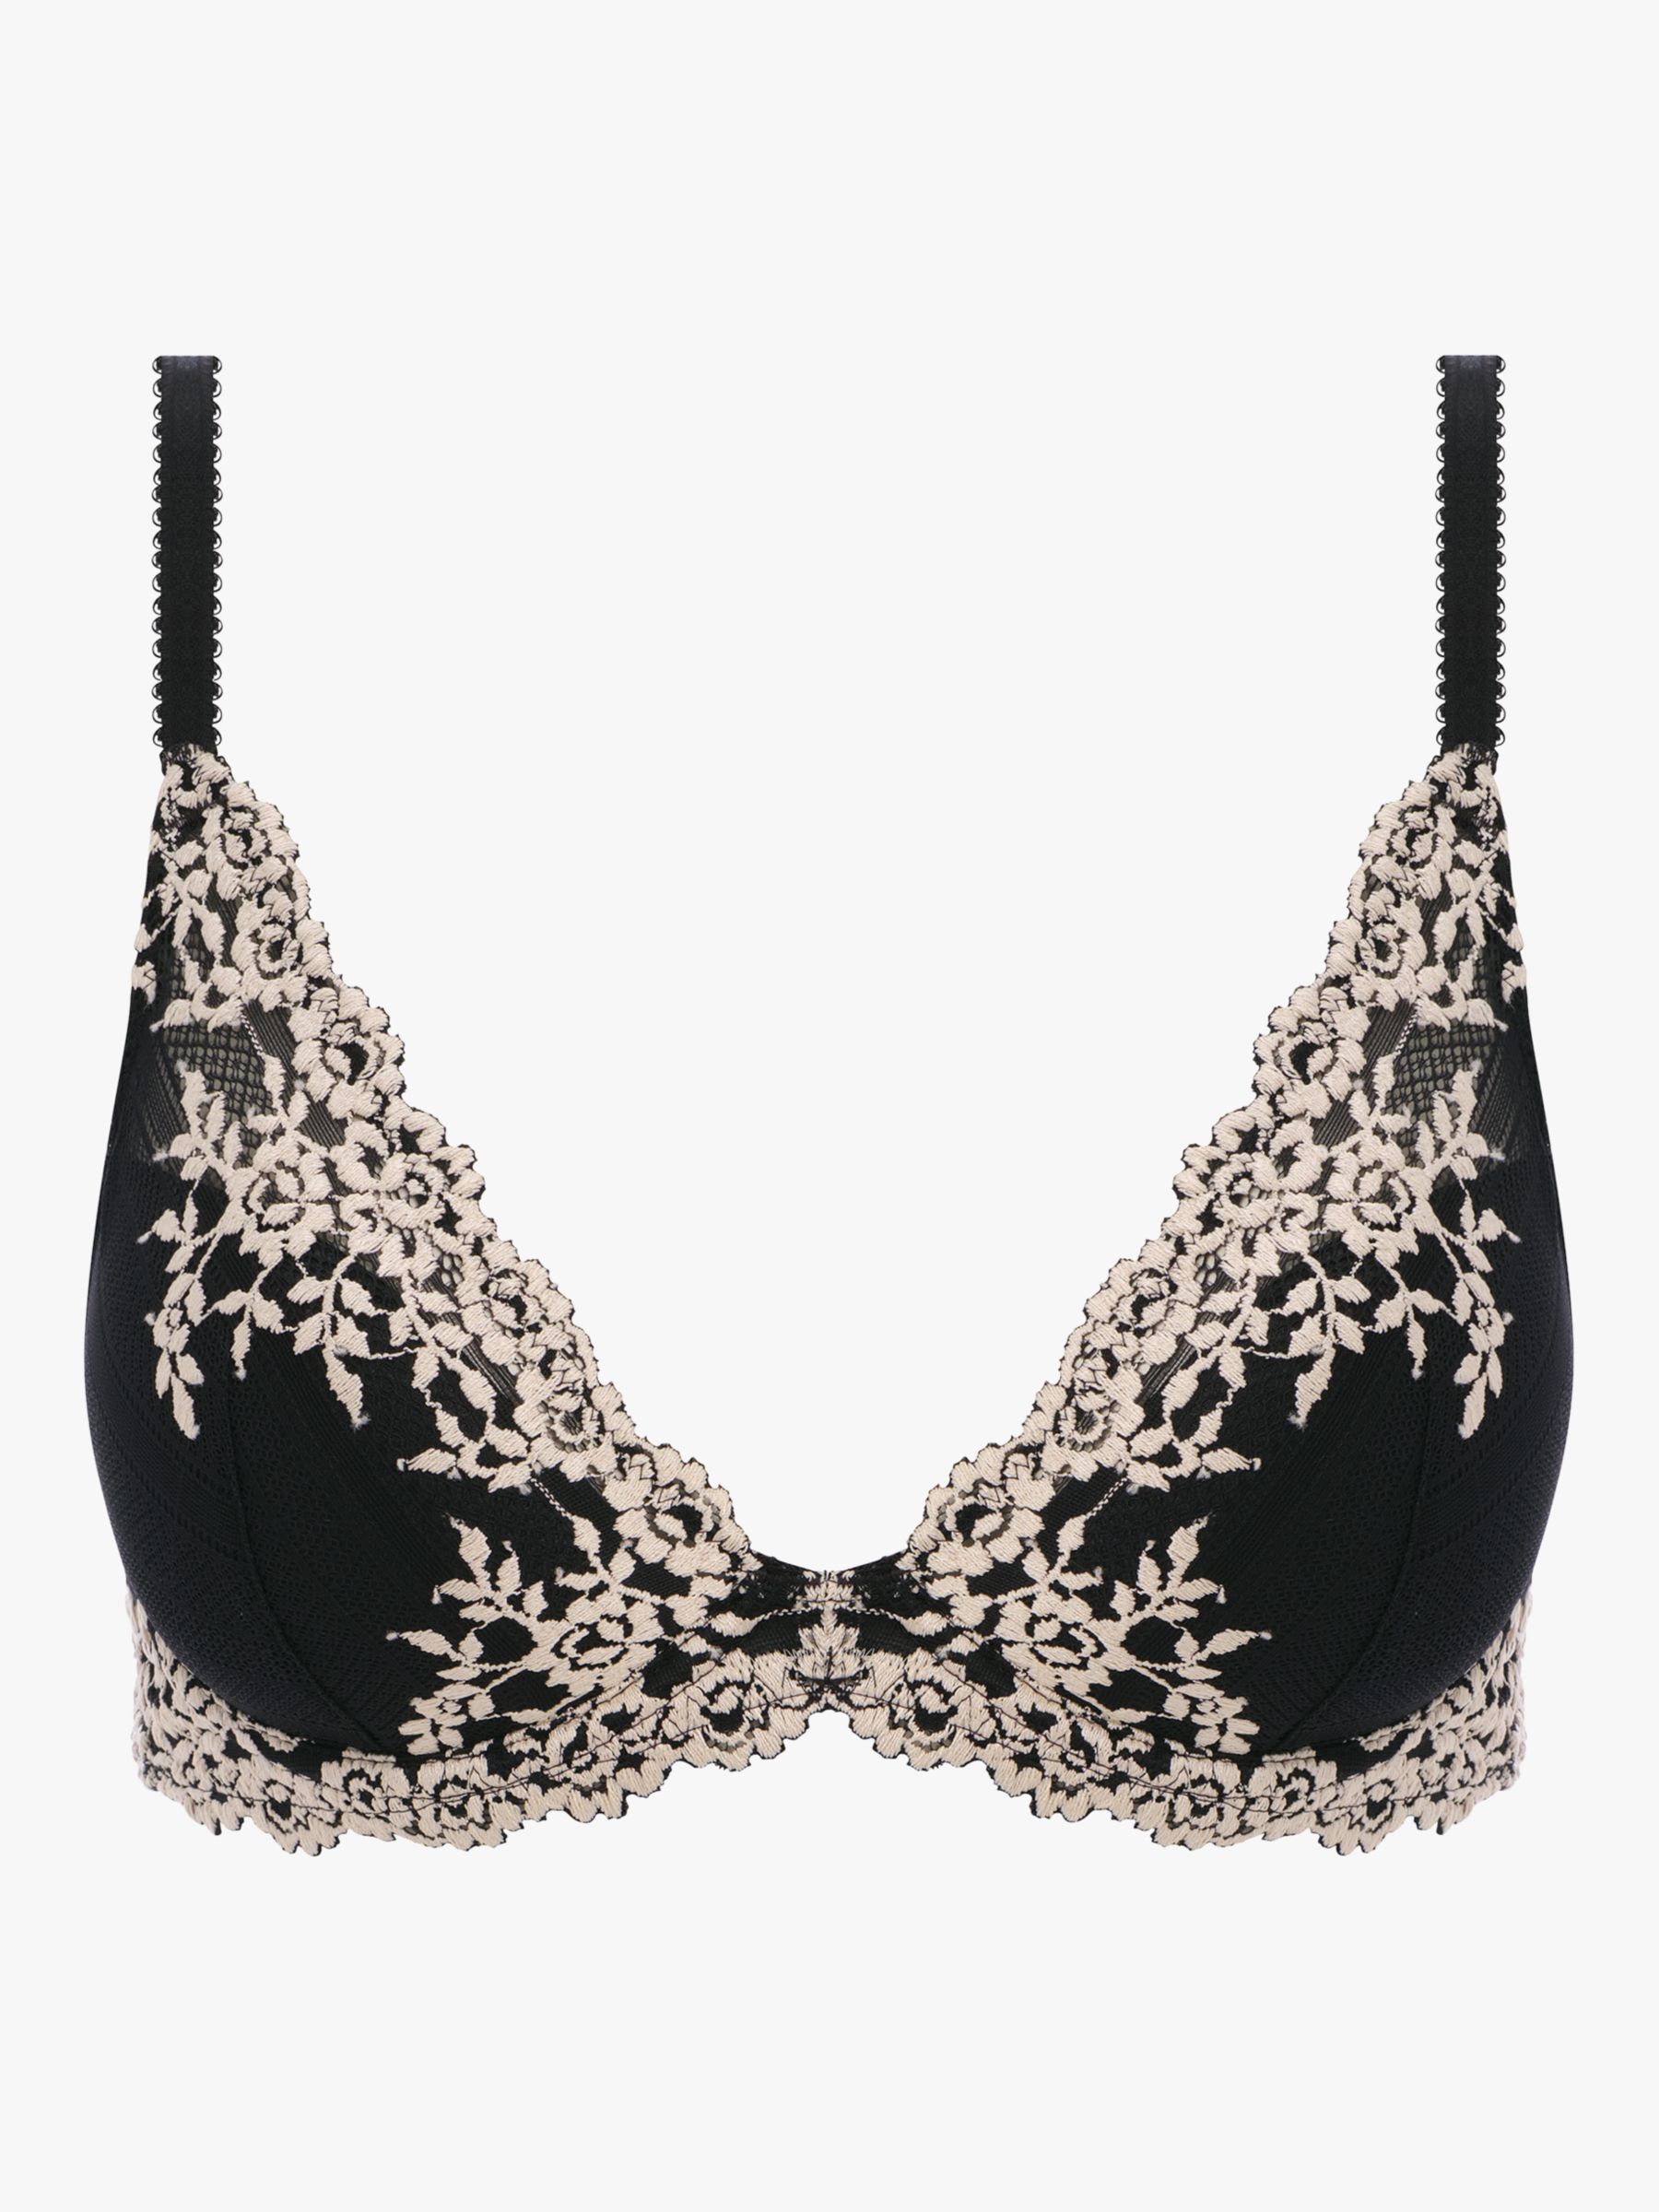 Wacoal Embrace Lace Underwired Plunge Bra, Wind Wind/Egret at John Lewis &  Partners